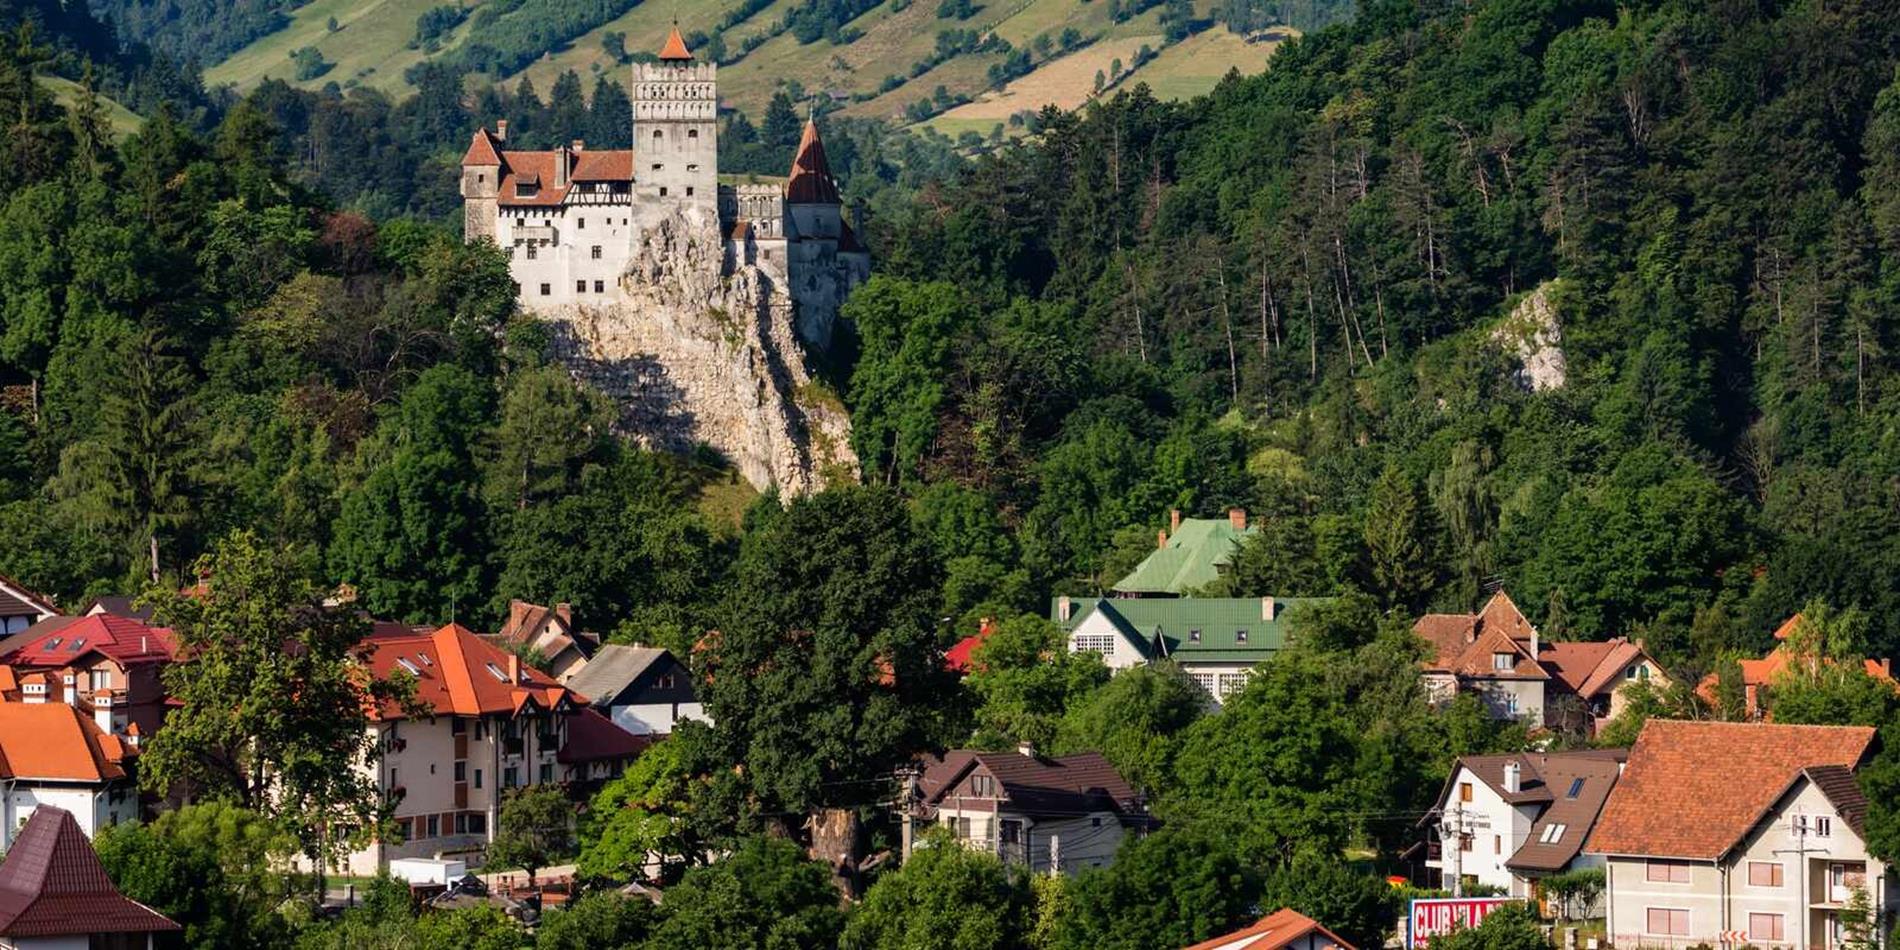 Bran Castle in the distance surrounded by forest